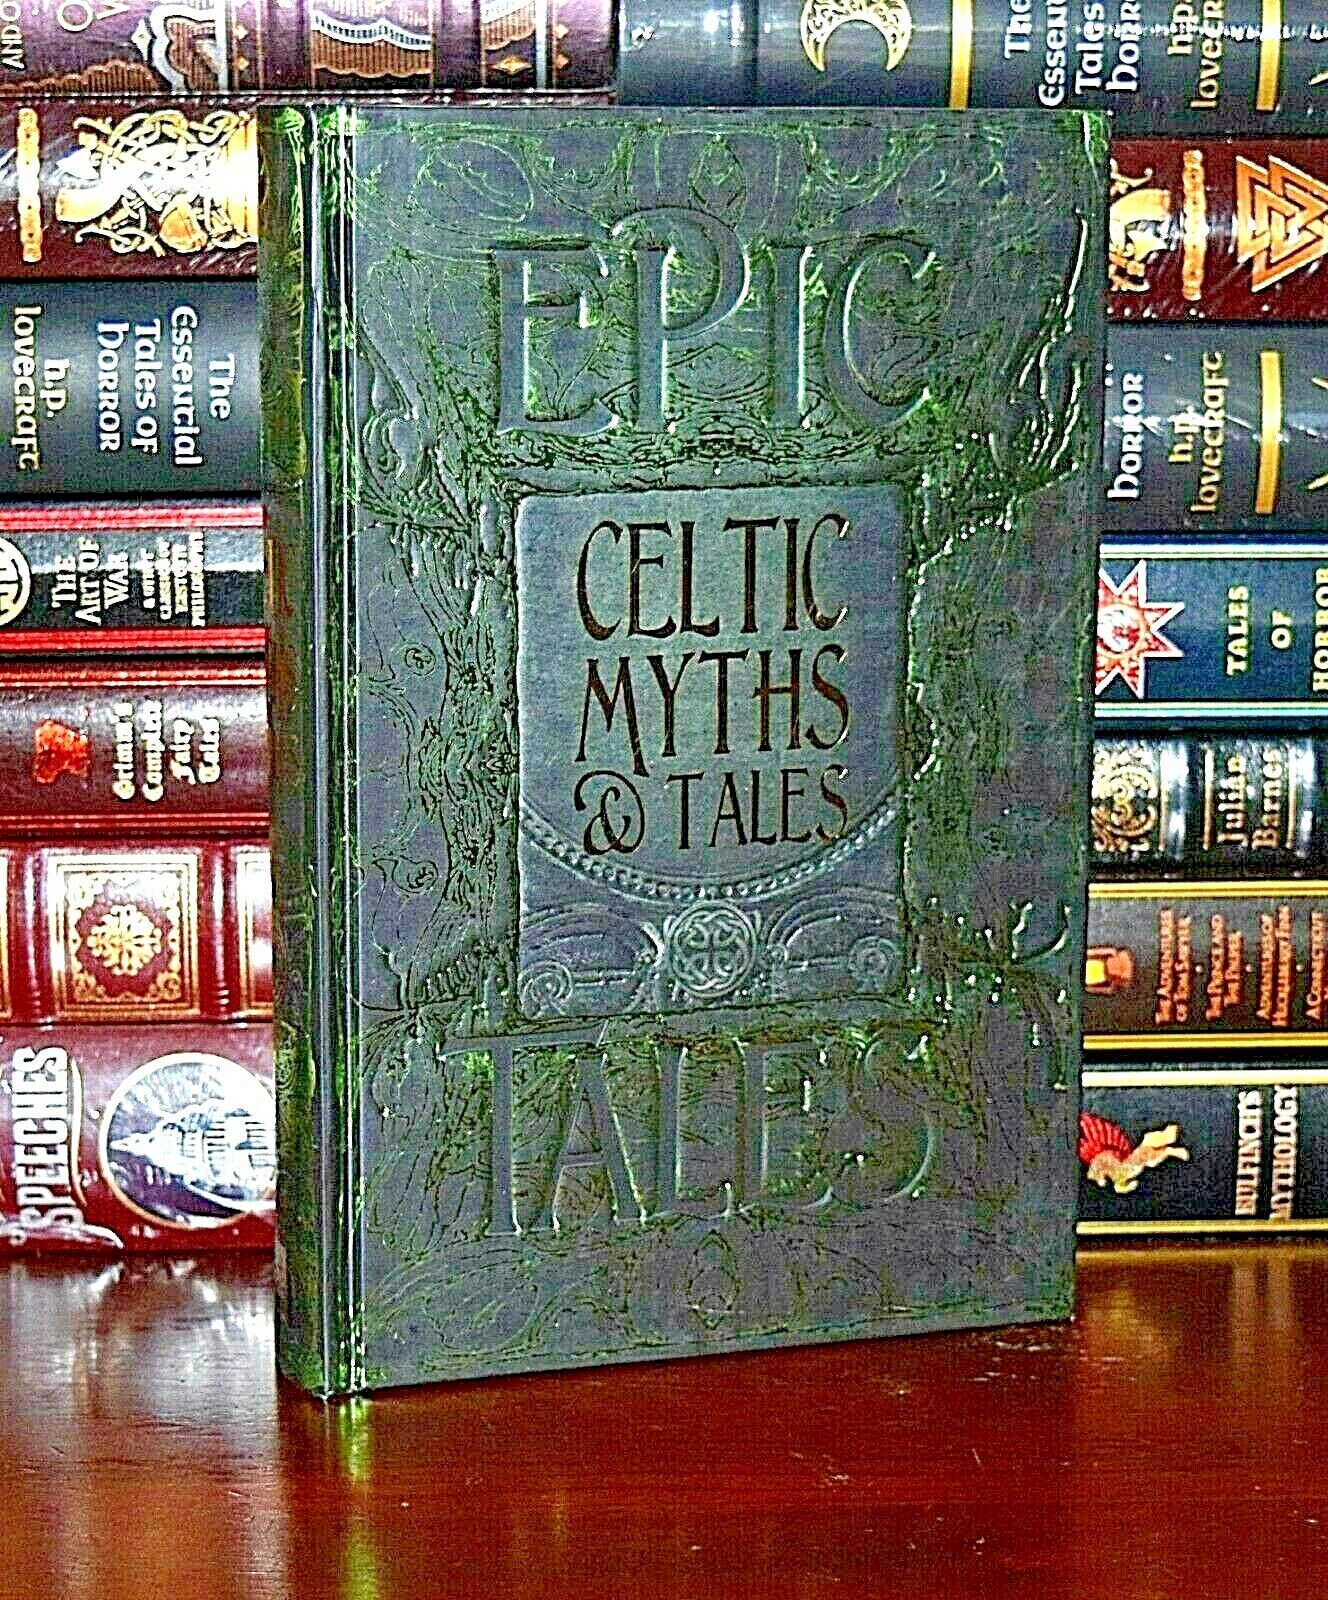 NEW Celtic Myths Tales Legends Irish Folklore Collectible Deluxe Hardcover Gift Без бренда